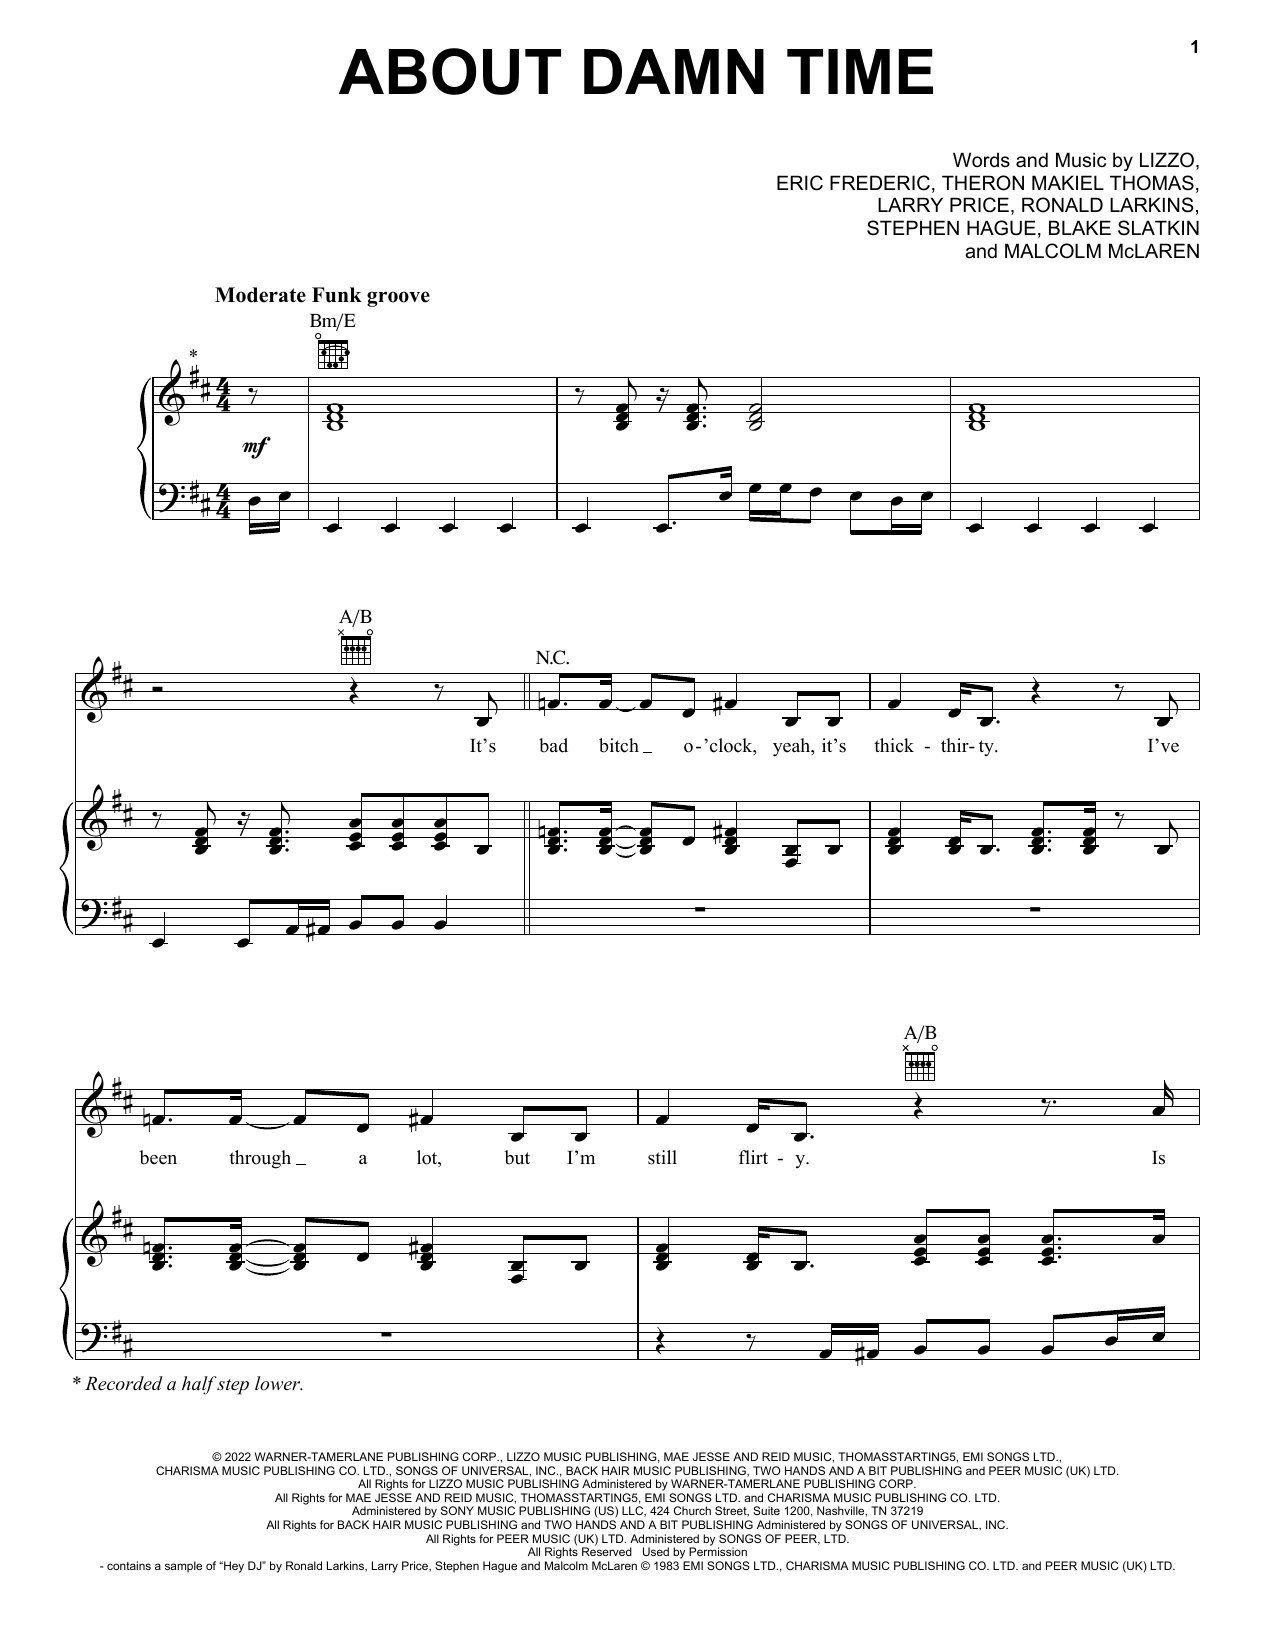 Lizzo About Damn Time sheet music notes and chords. Download Printable PDF.